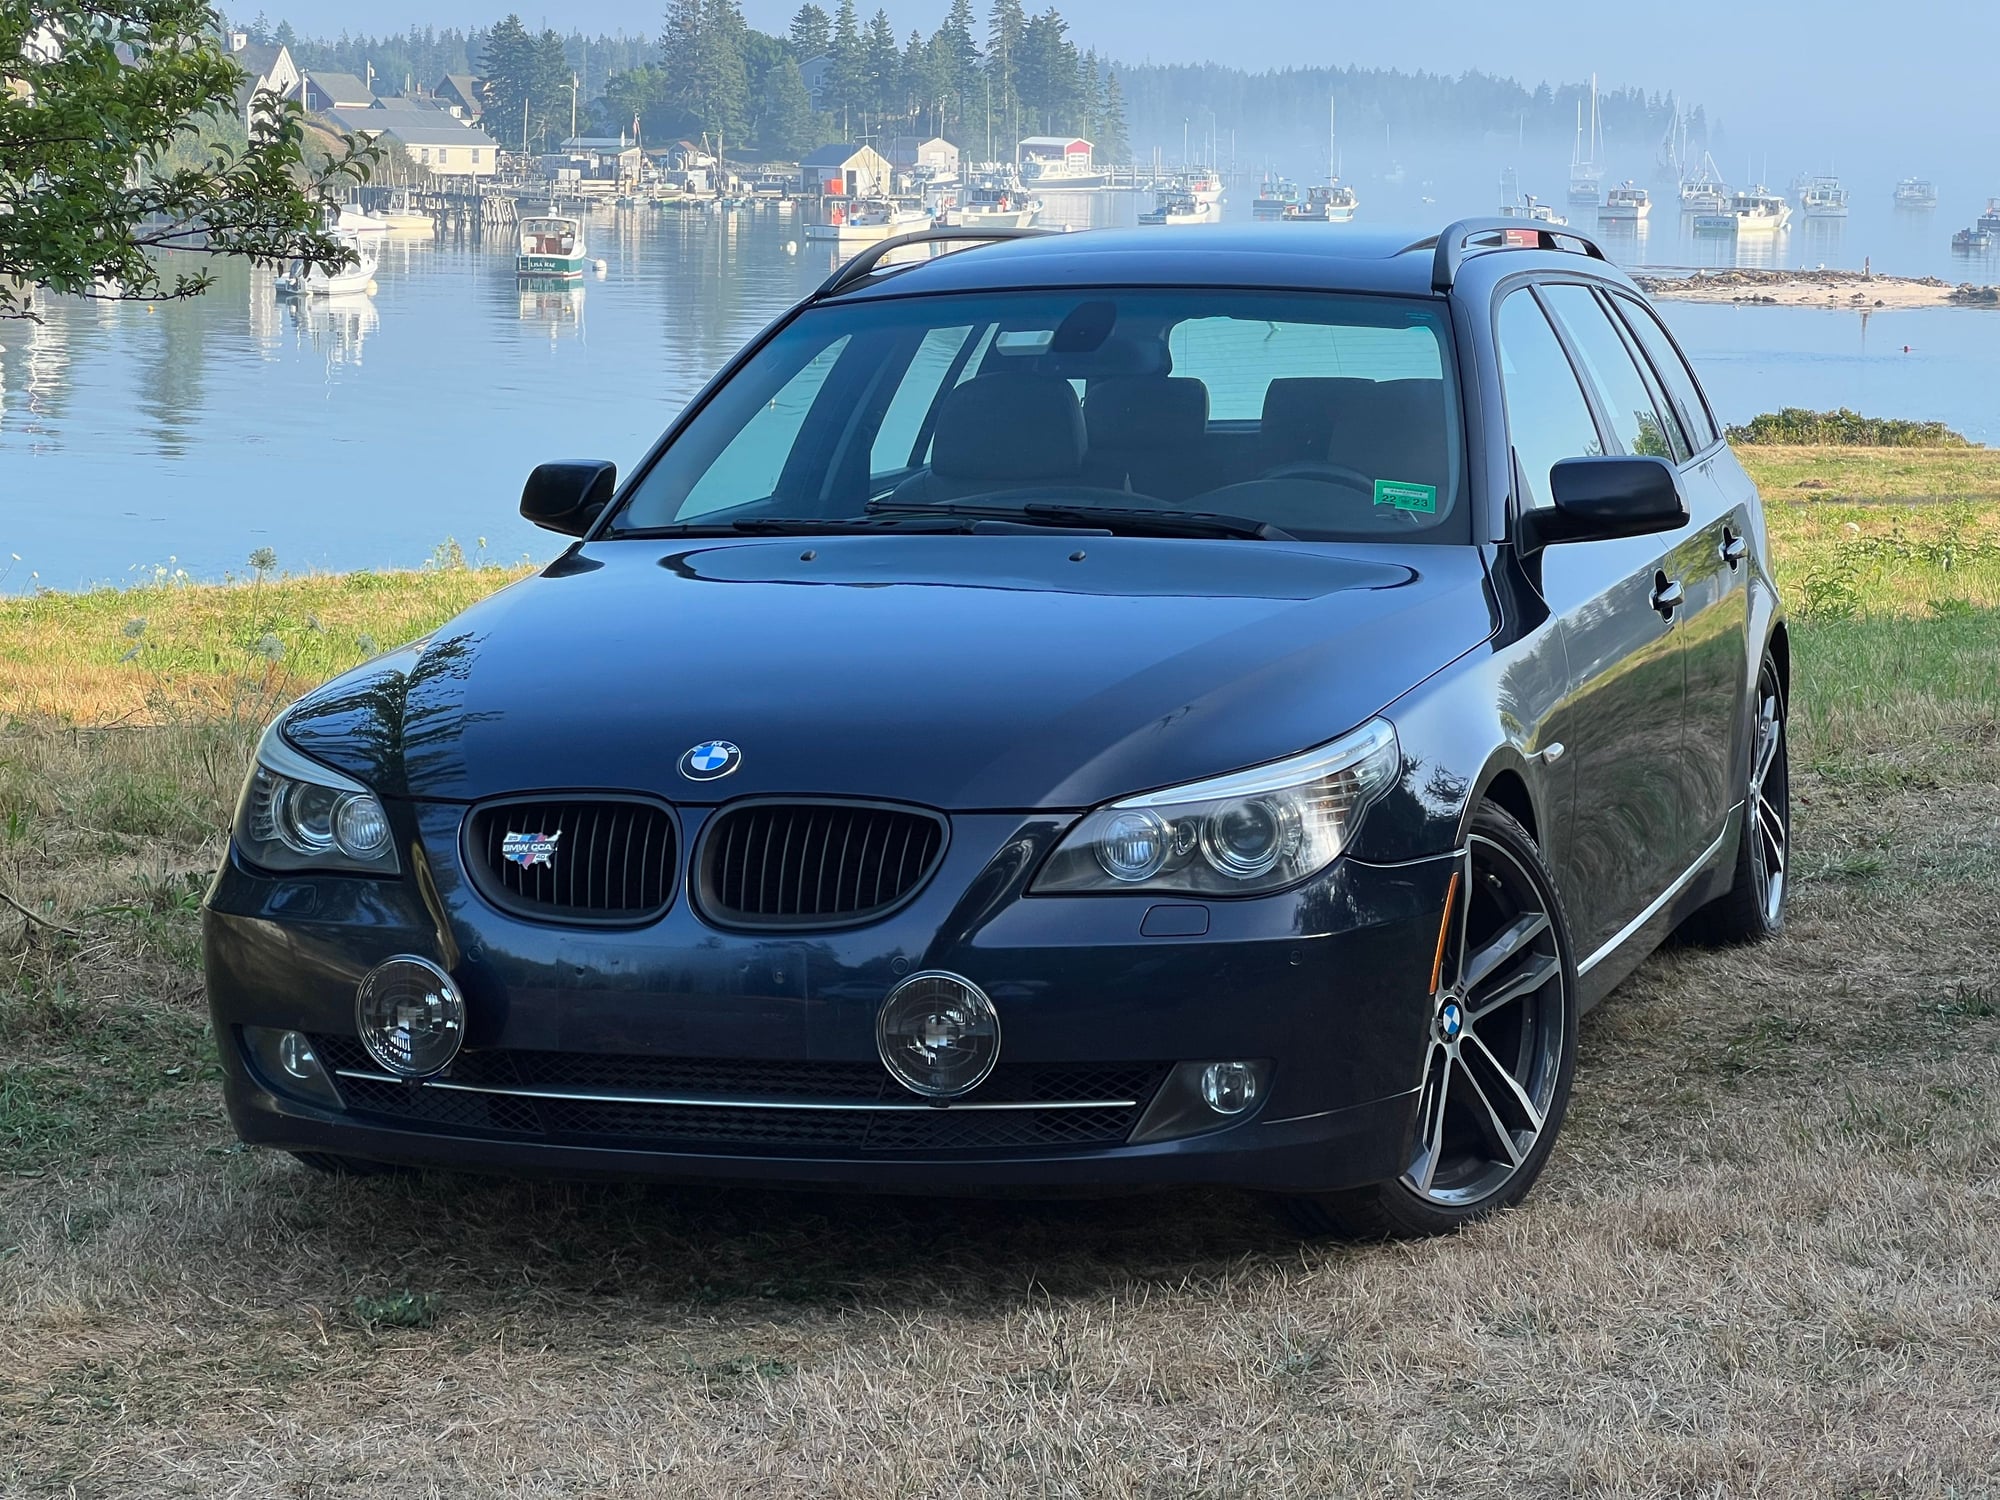 E61 535xi 6MT Budget Daily Project -  - Forums